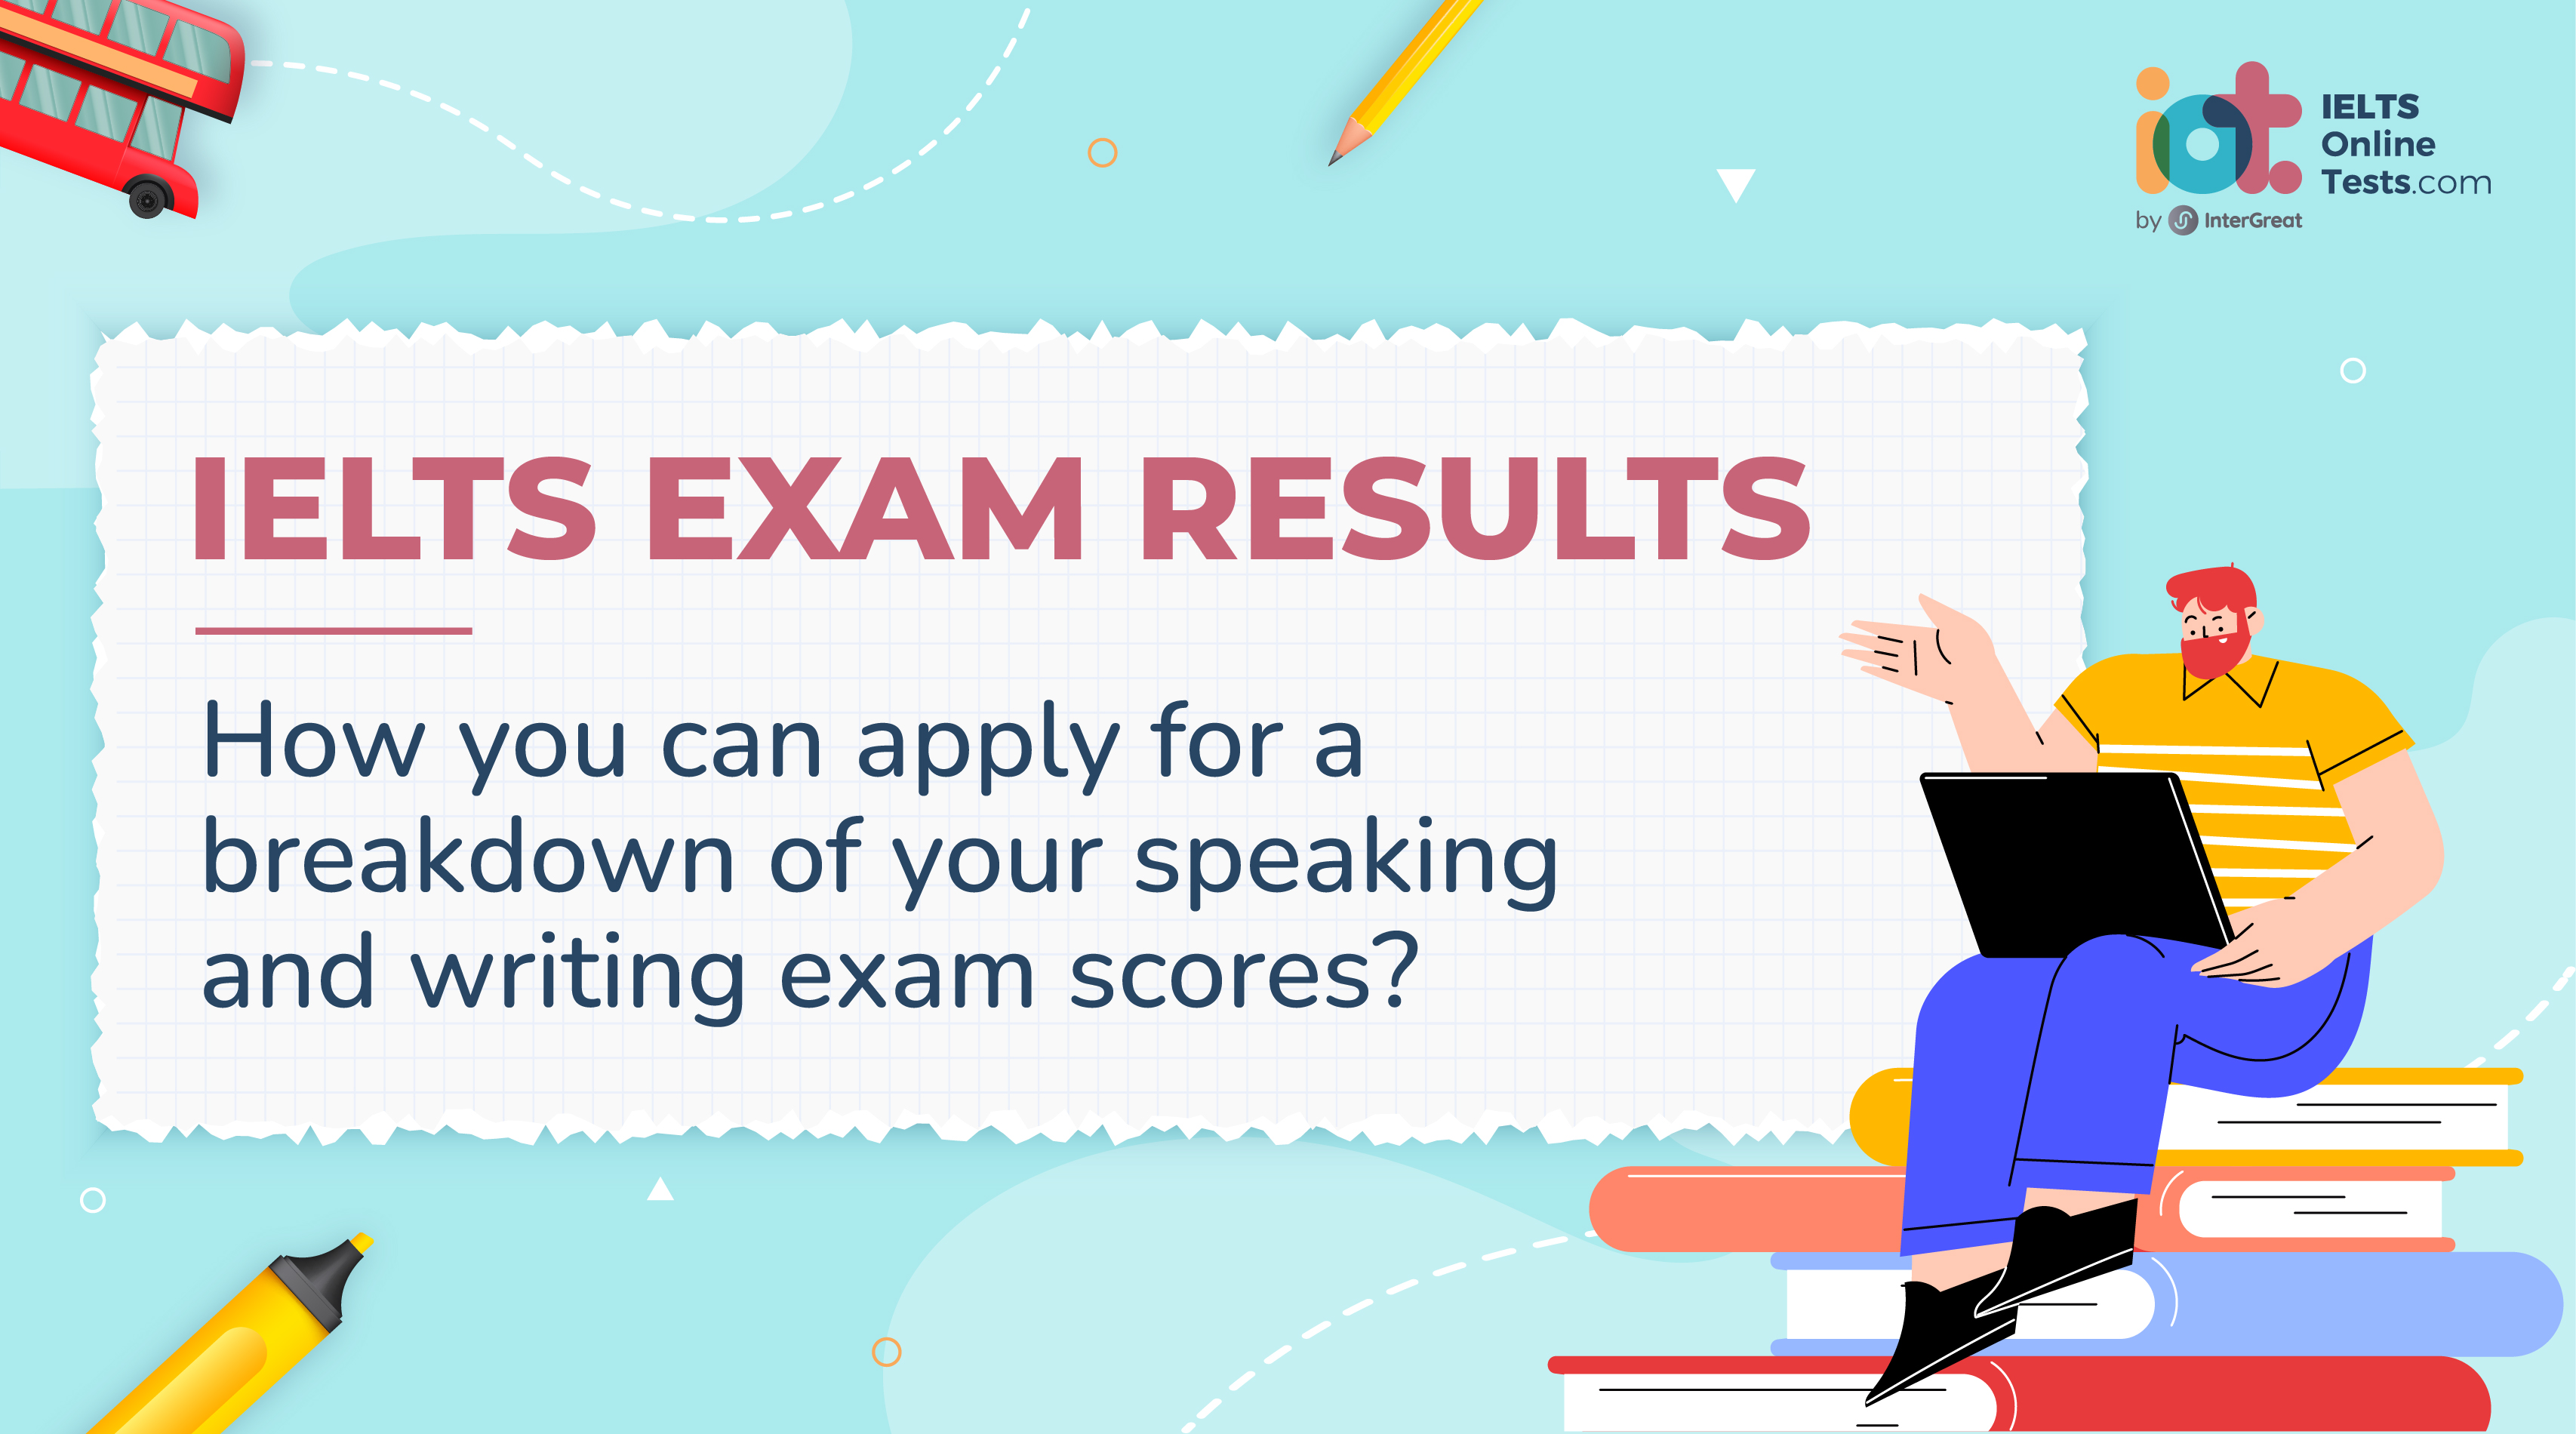 IELTS Exam Results: how you can apply for a breakdown of your speaking and writing exam scores